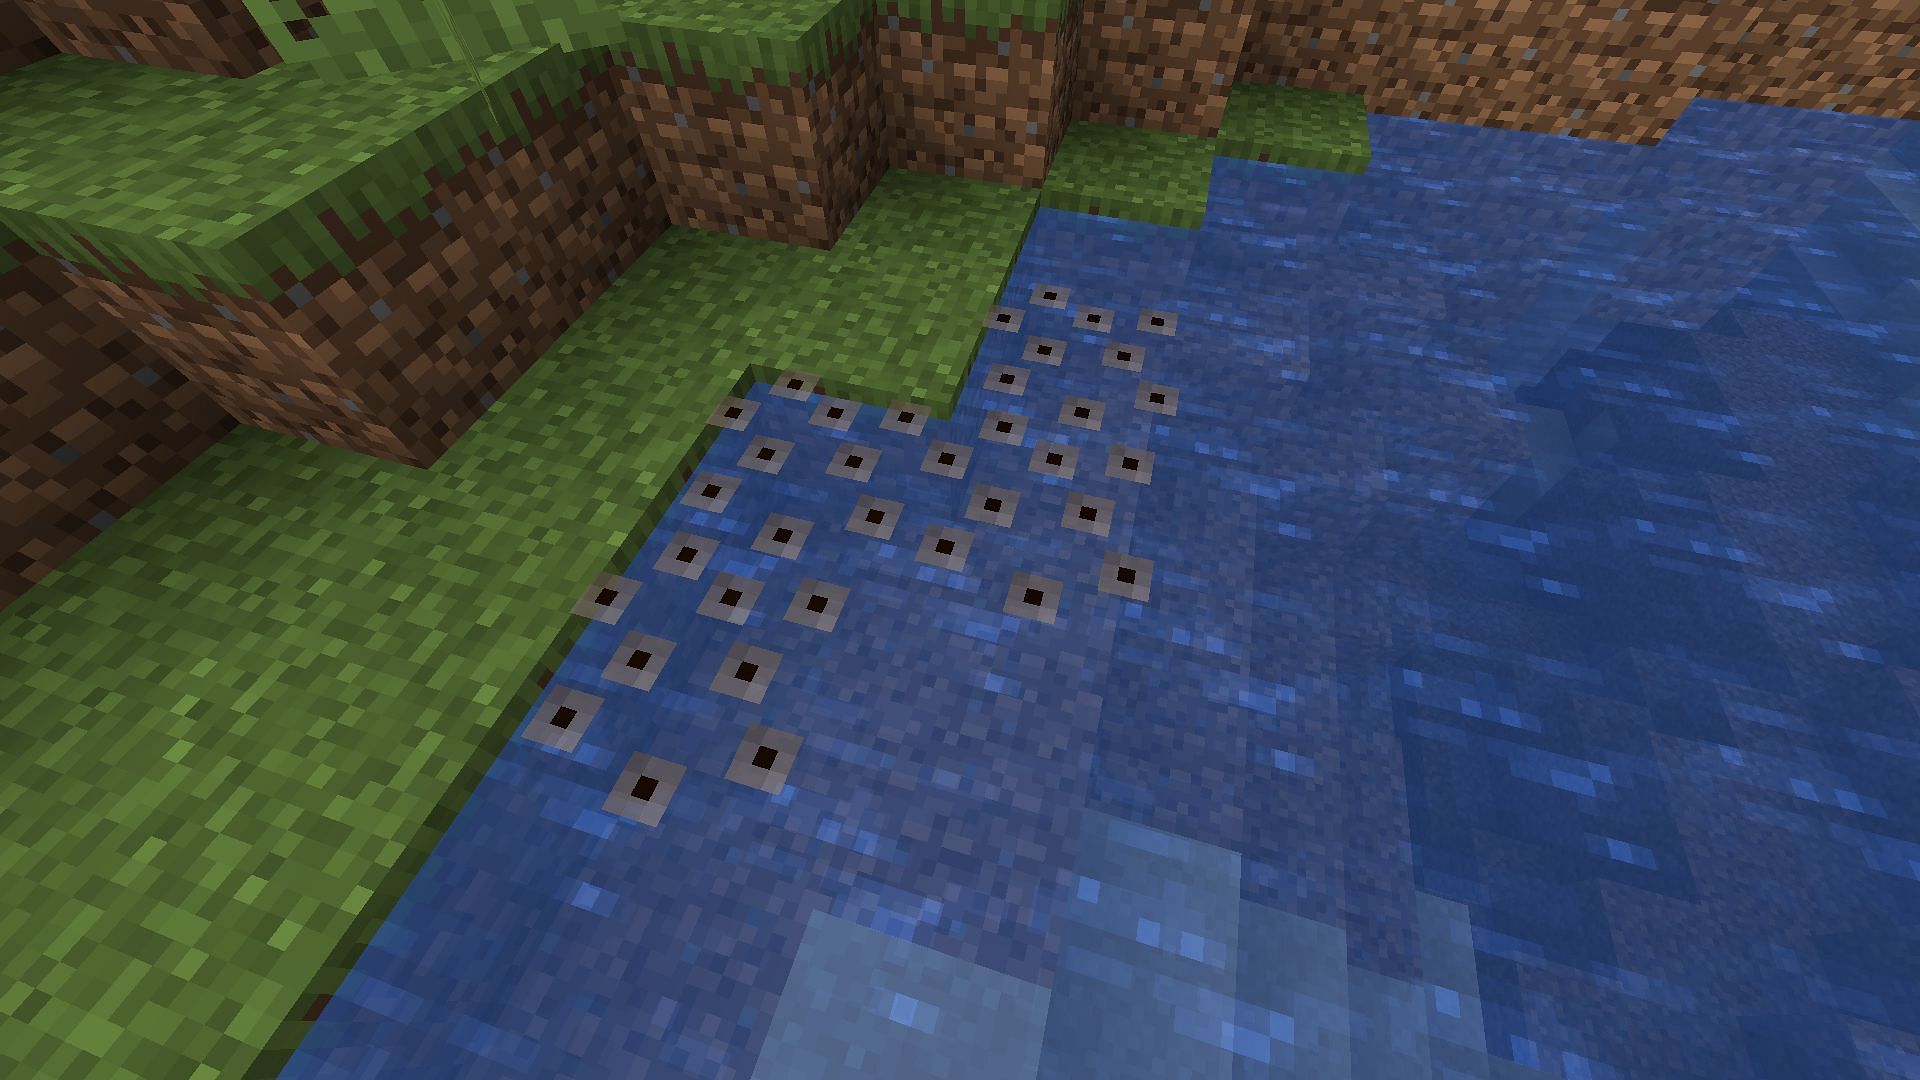 Frogspawn on the edge of a river (Image via Minecraft)